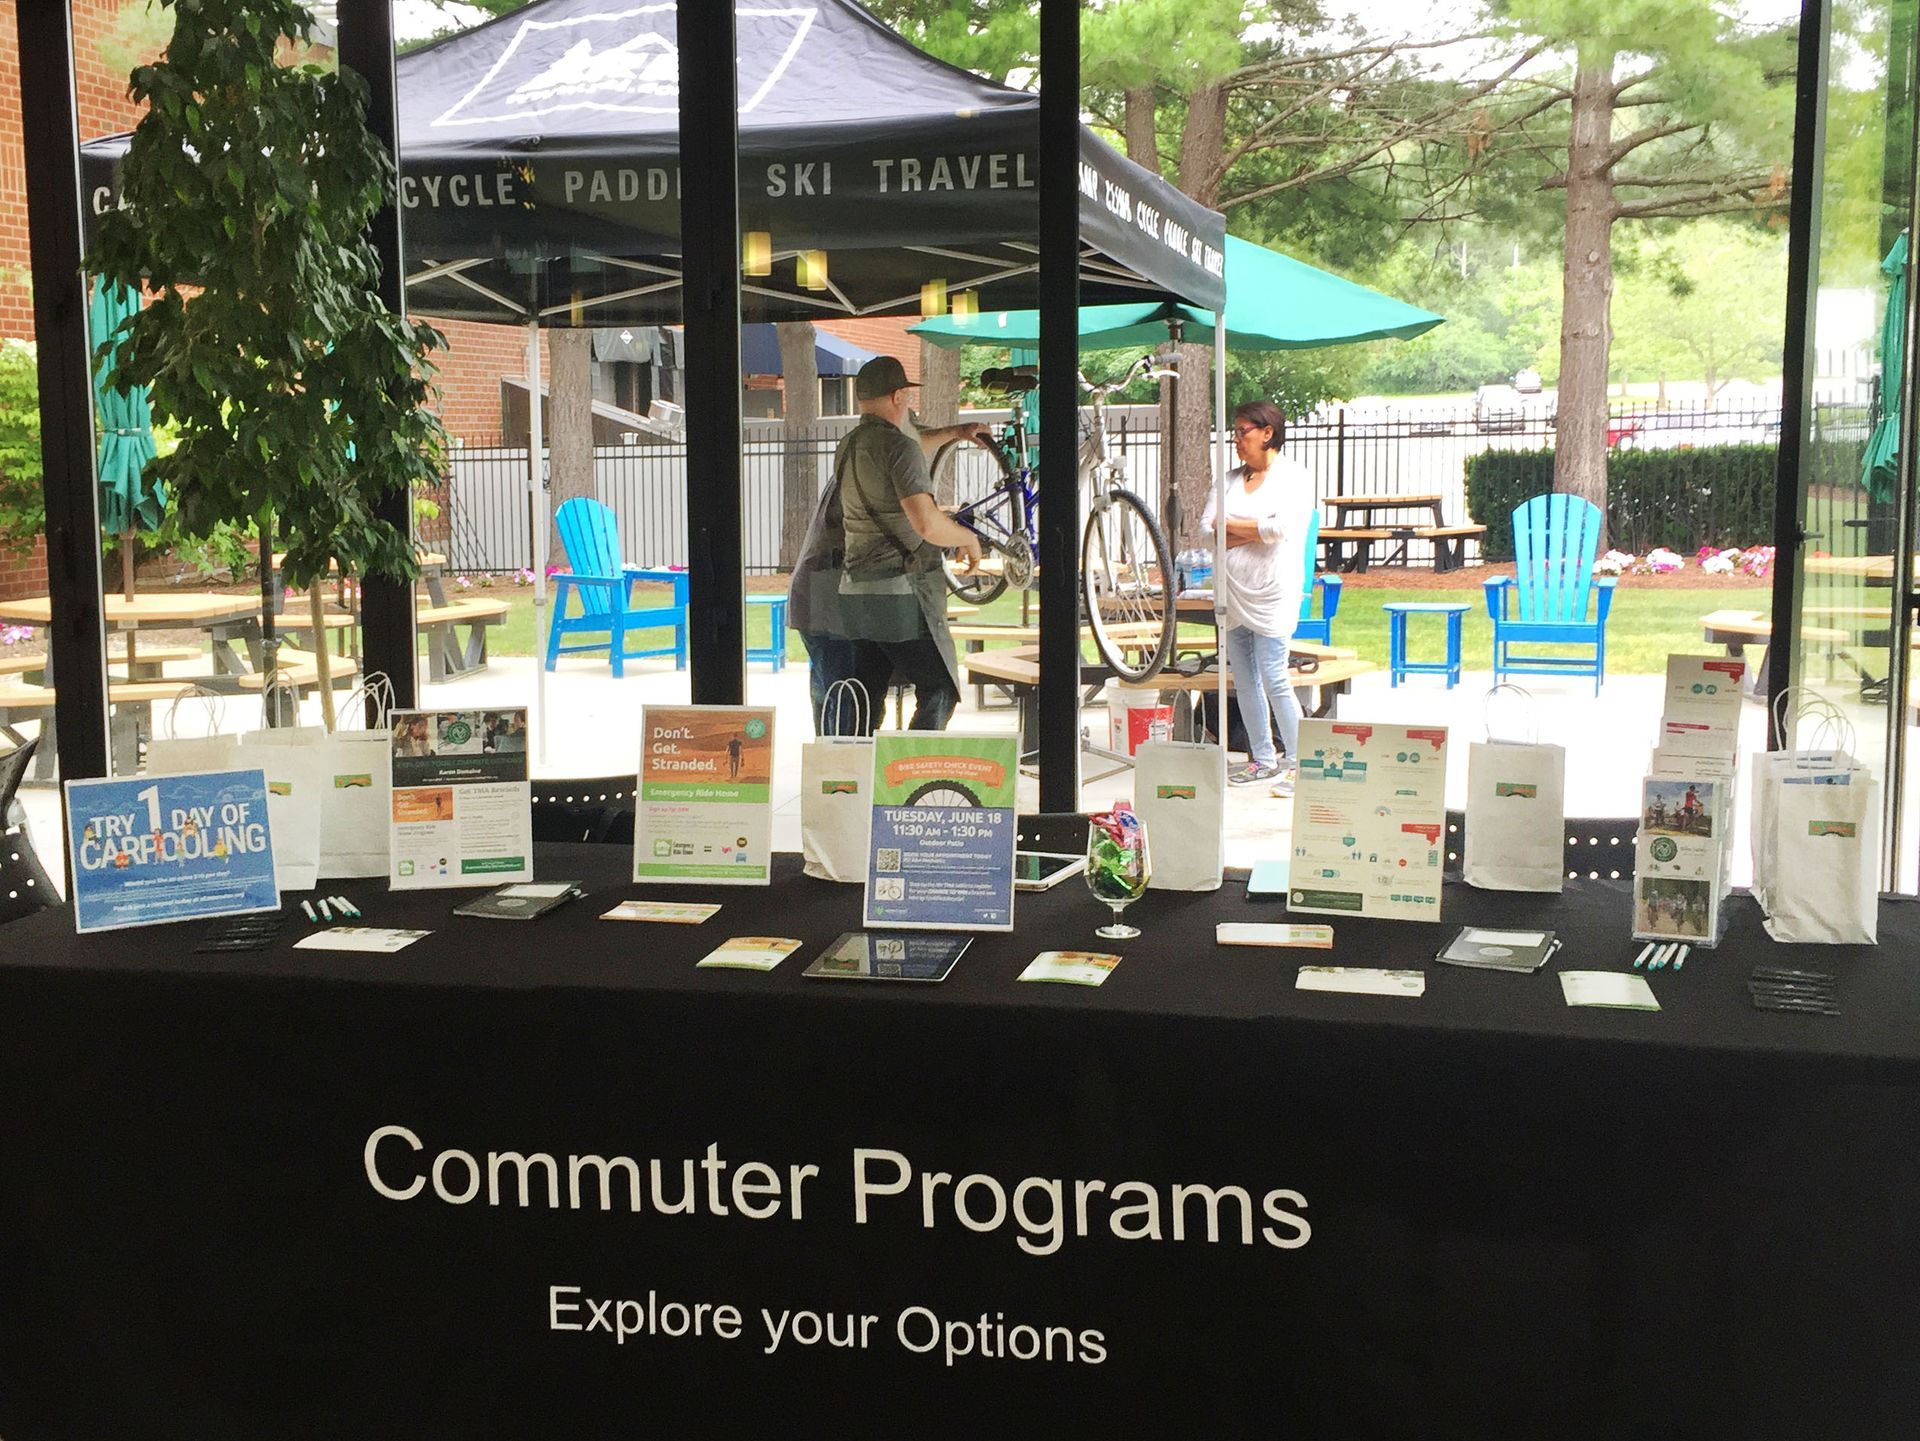 commuter-programs-event-table